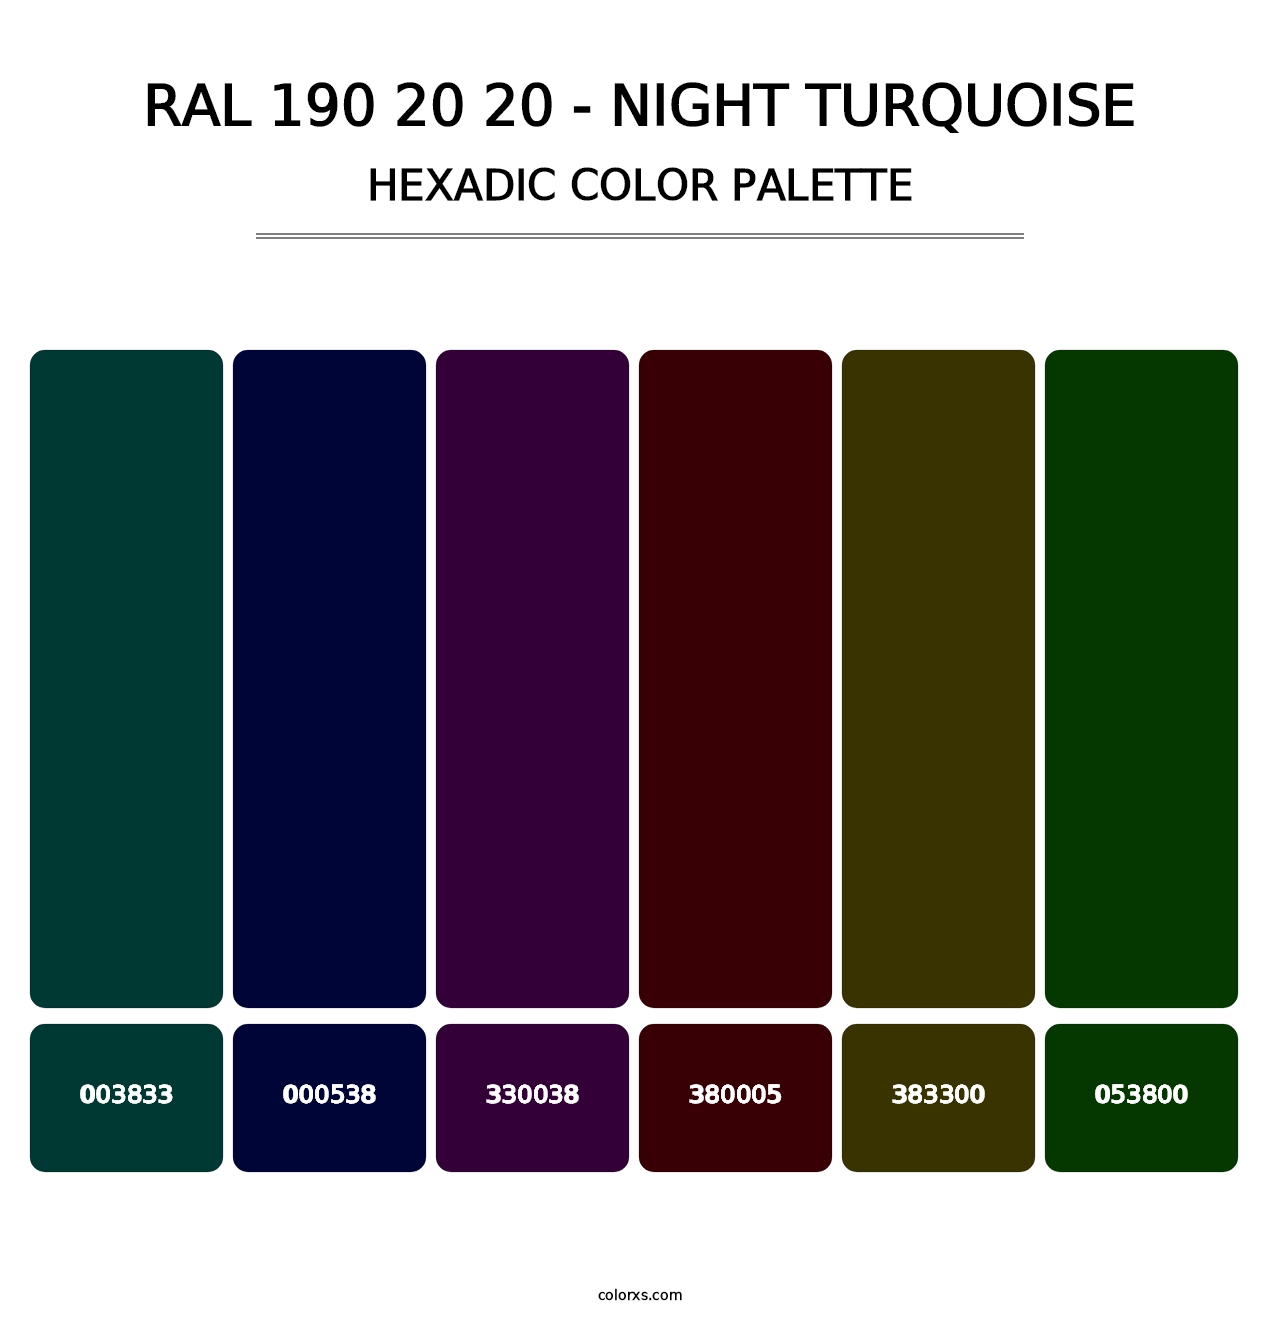 RAL 190 20 20 - Night Turquoise - Hexadic Color Palette